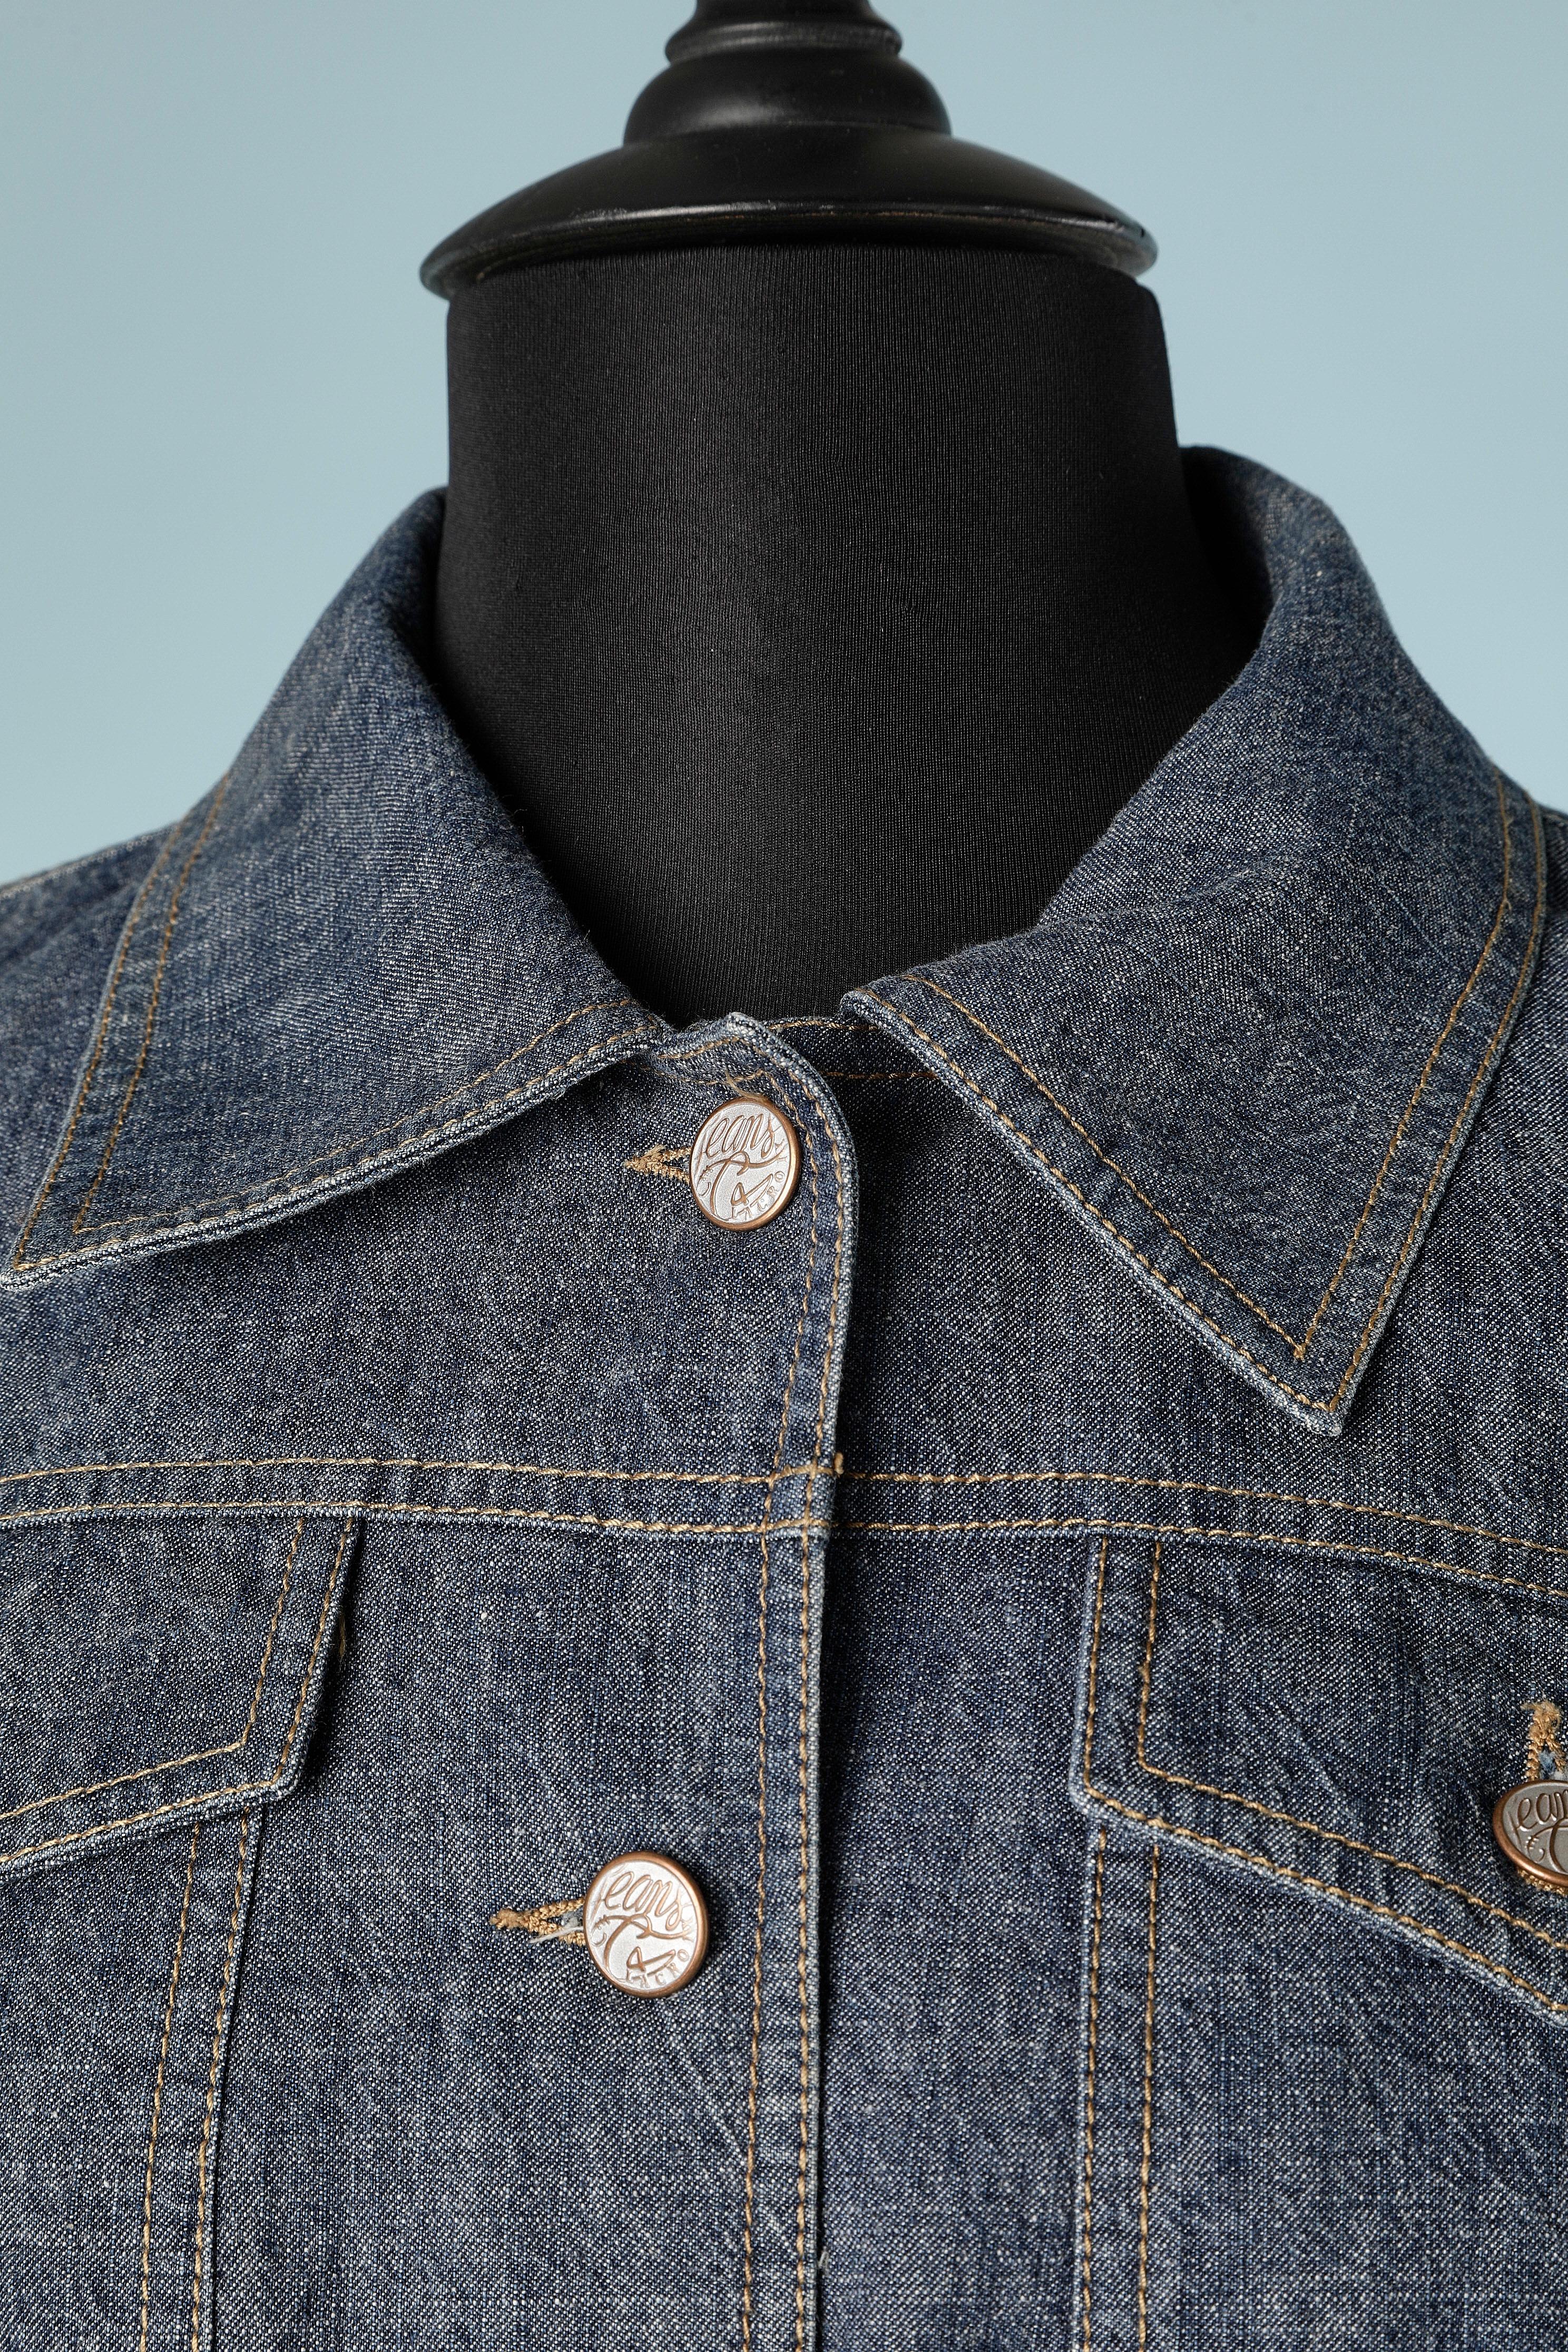 Denim jacket with see-through embroideries on the sleeve.Branded buttons.
SIZE 38 (M)